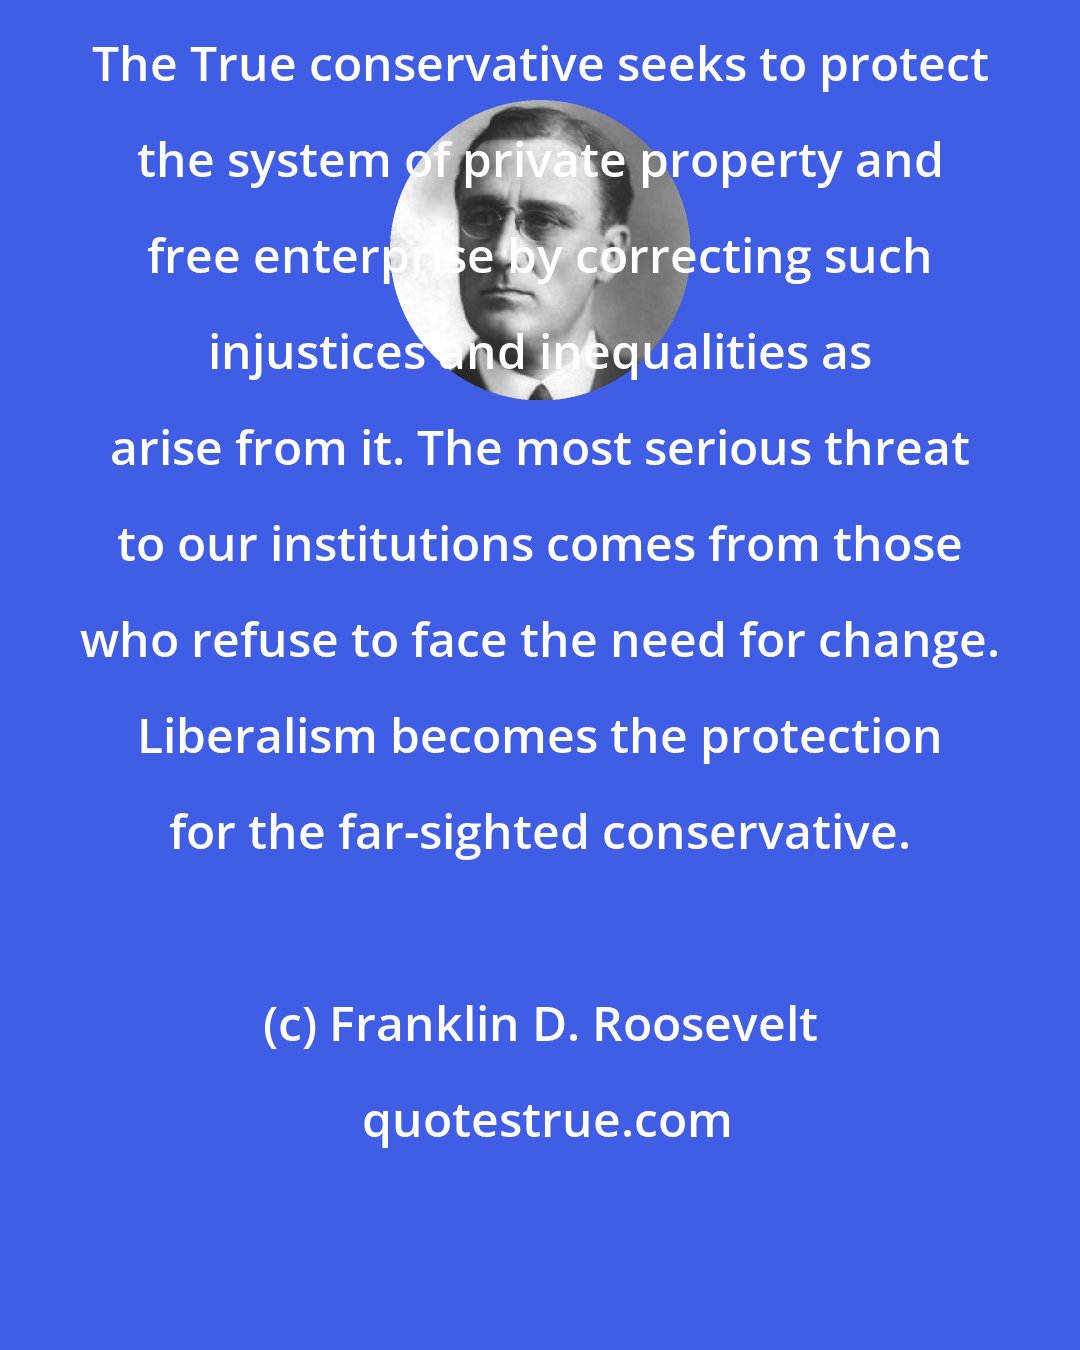 Franklin D. Roosevelt: The True conservative seeks to protect the system of private property and free enterprise by correcting such injustices and inequalities as arise from it. The most serious threat to our institutions comes from those who refuse to face the need for change. Liberalism becomes the protection for the far-sighted conservative.